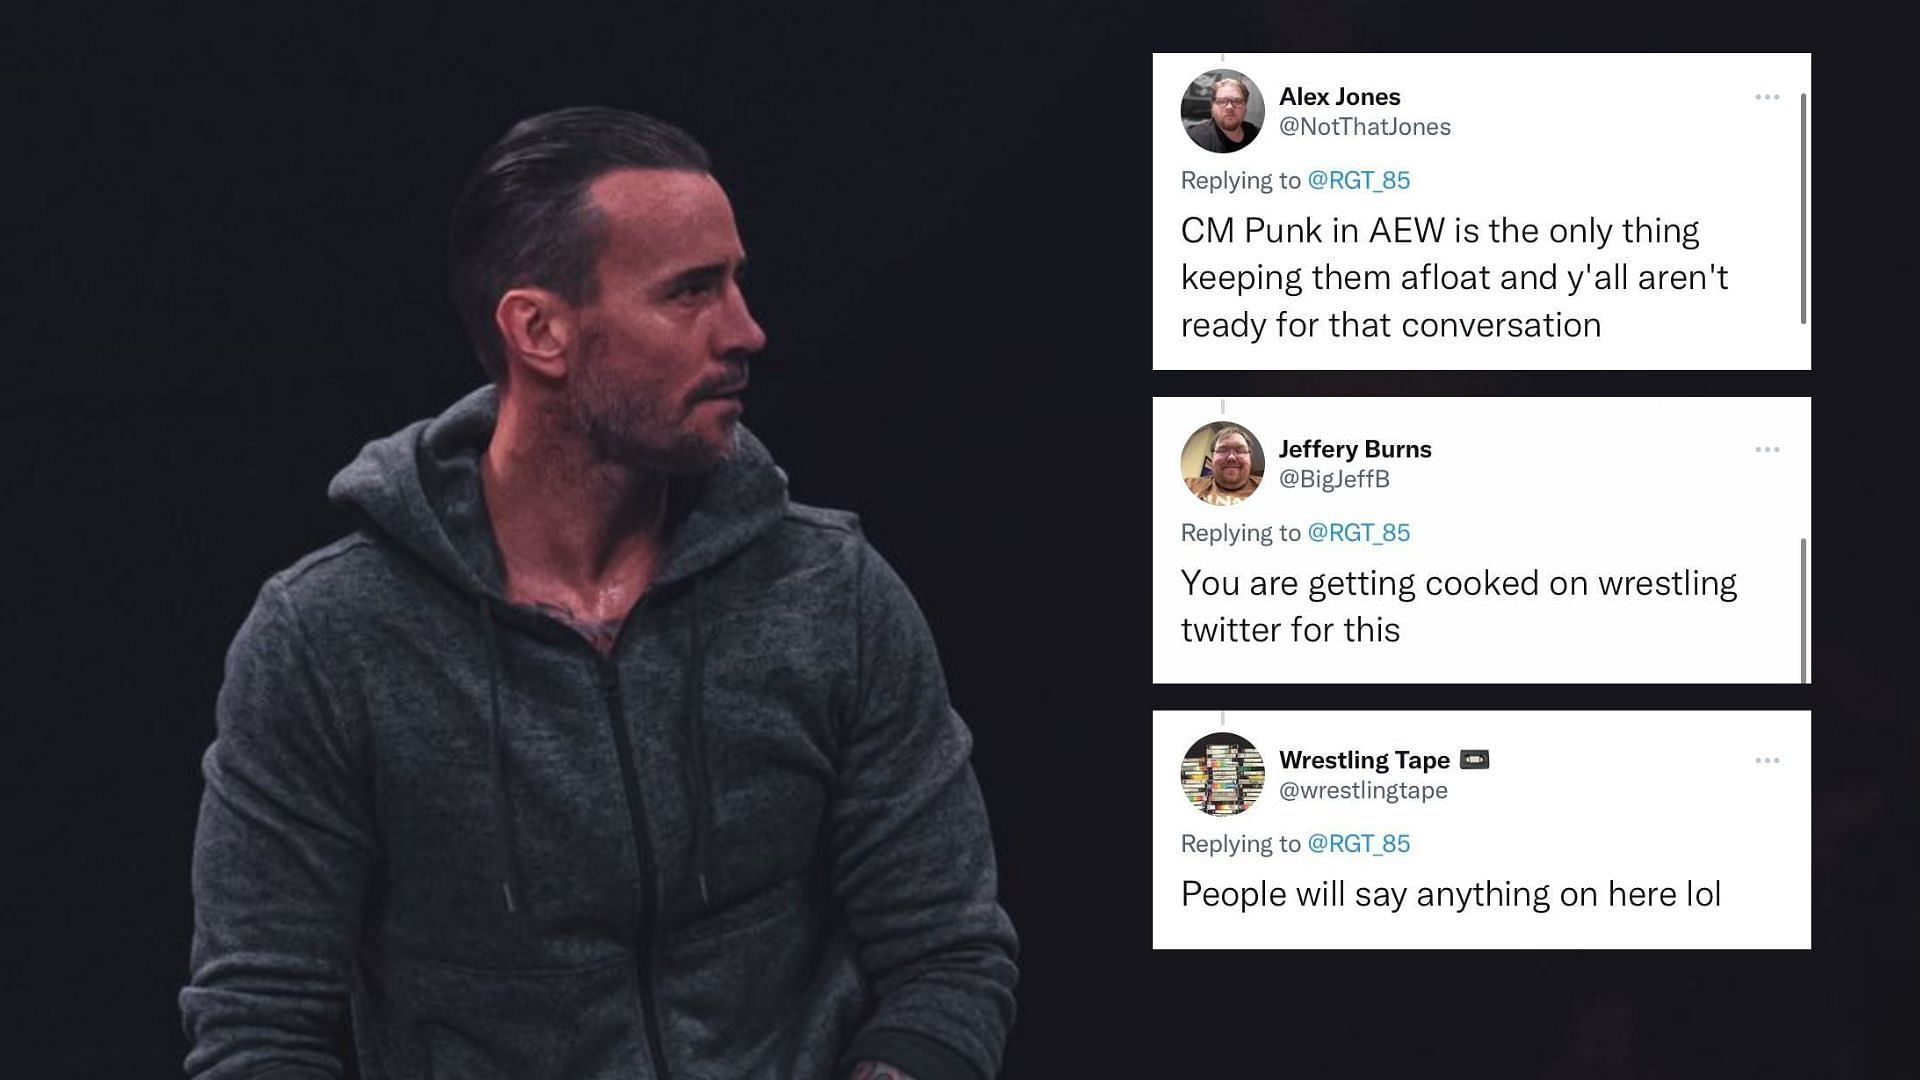 Twitter Explodes Comparing Cm Punk To Wwe Hall Of Famer